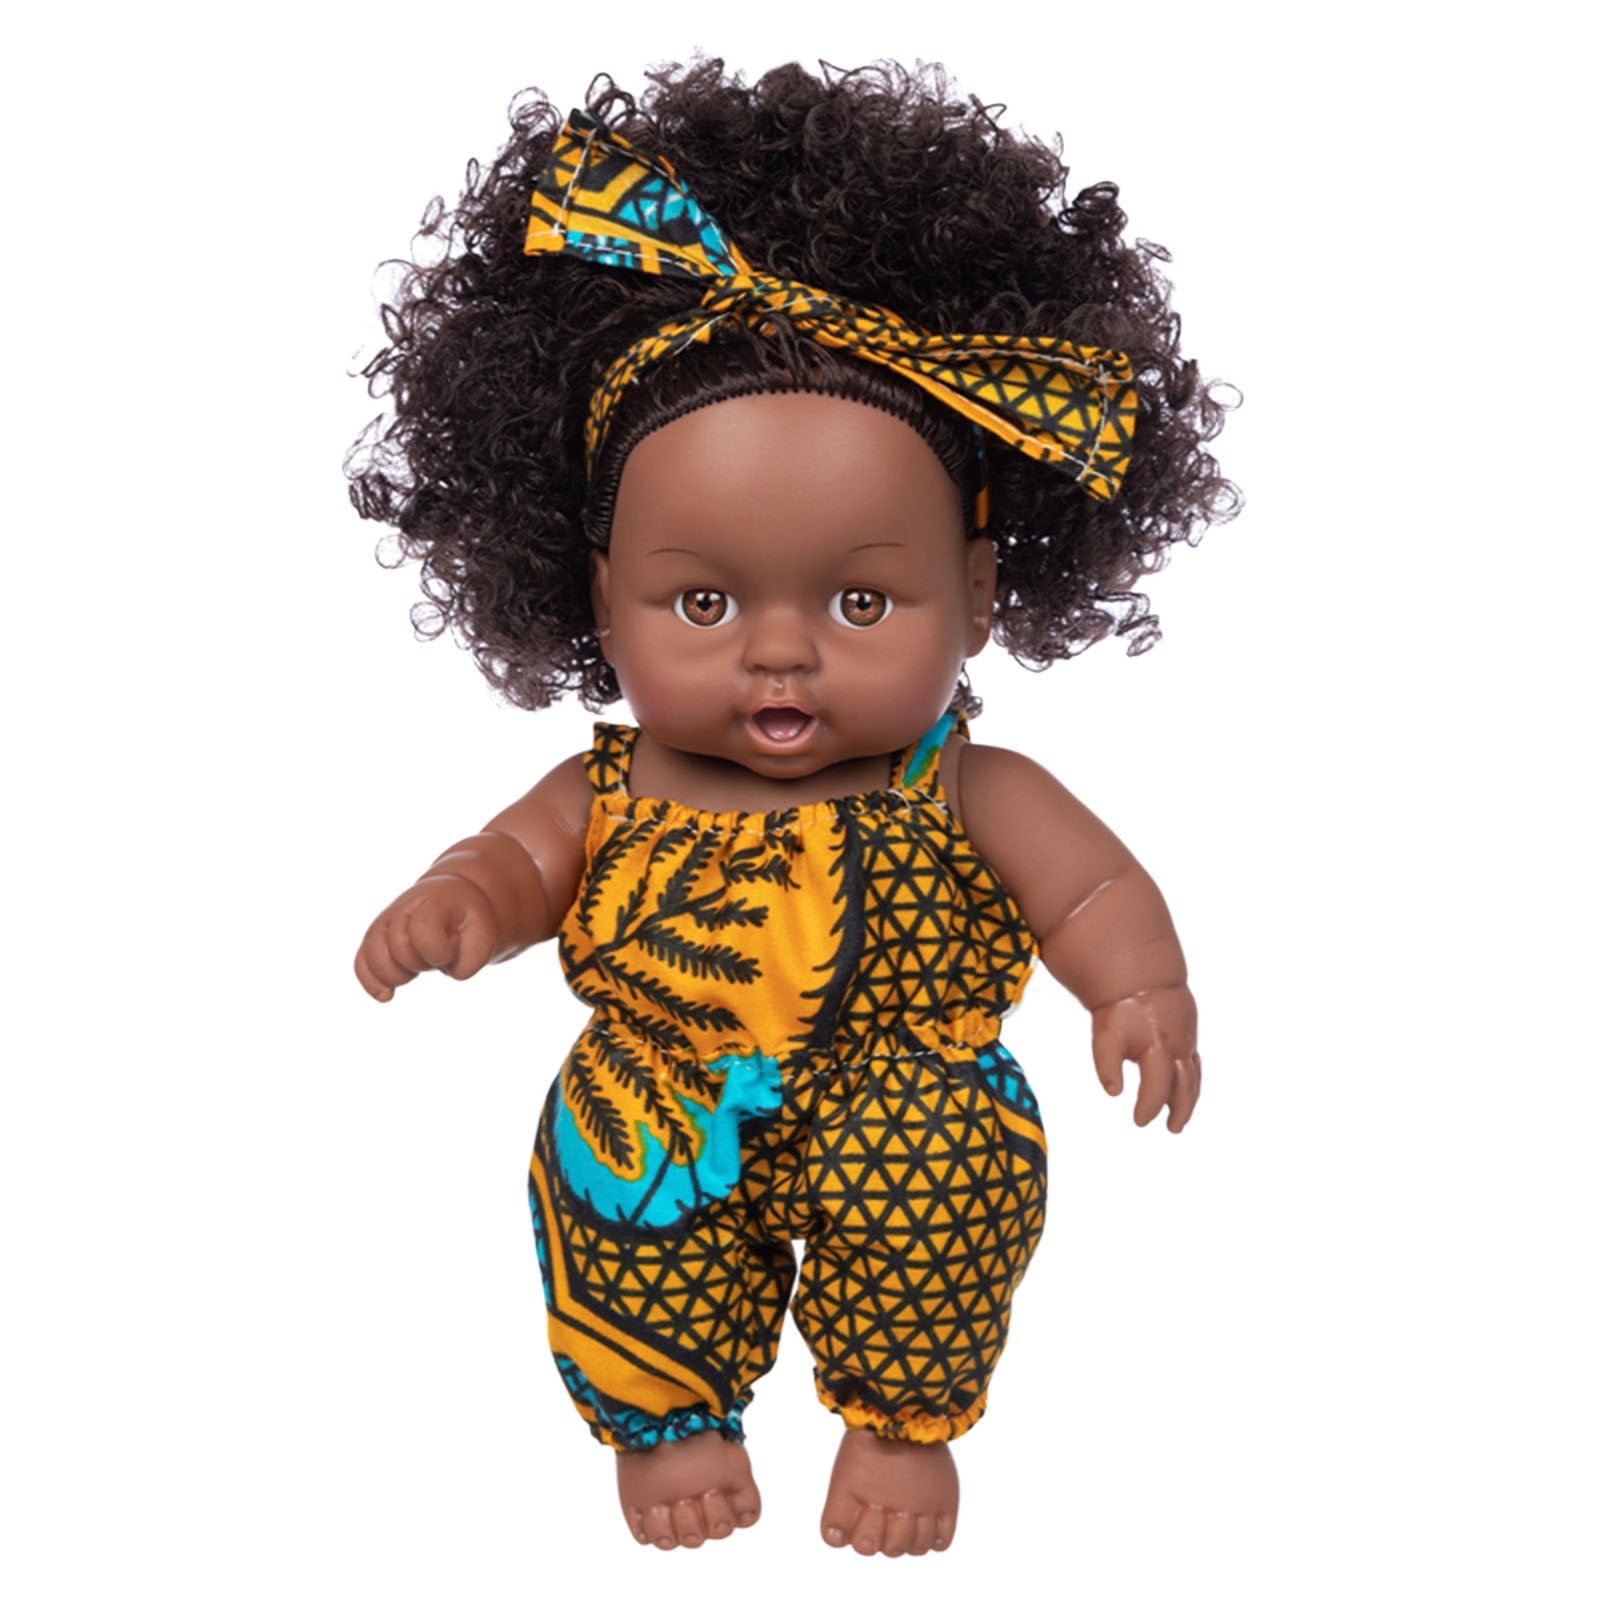 Androgynous African American Doll CLEARANCE SALE free Domestic Shipping,  Dreads Natural Black Hair Ambiguous Boy Girl Black Friday Sale 